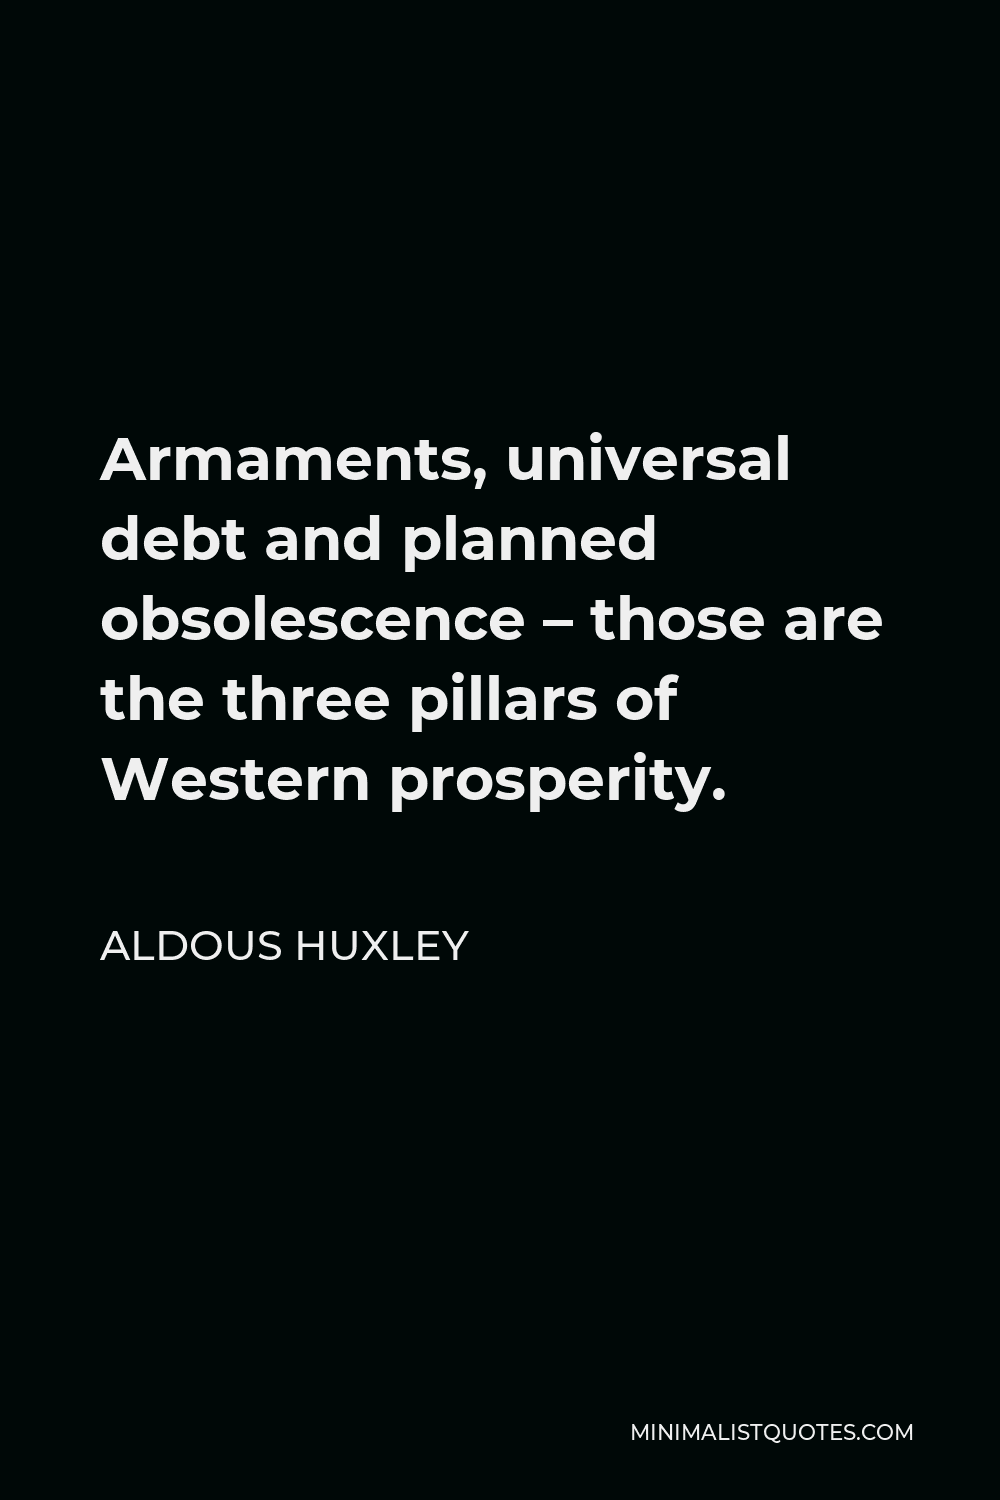 Aldous Huxley Quote - Armaments, universal debt and planned obsolescence – those are the three pillars of Western prosperity.